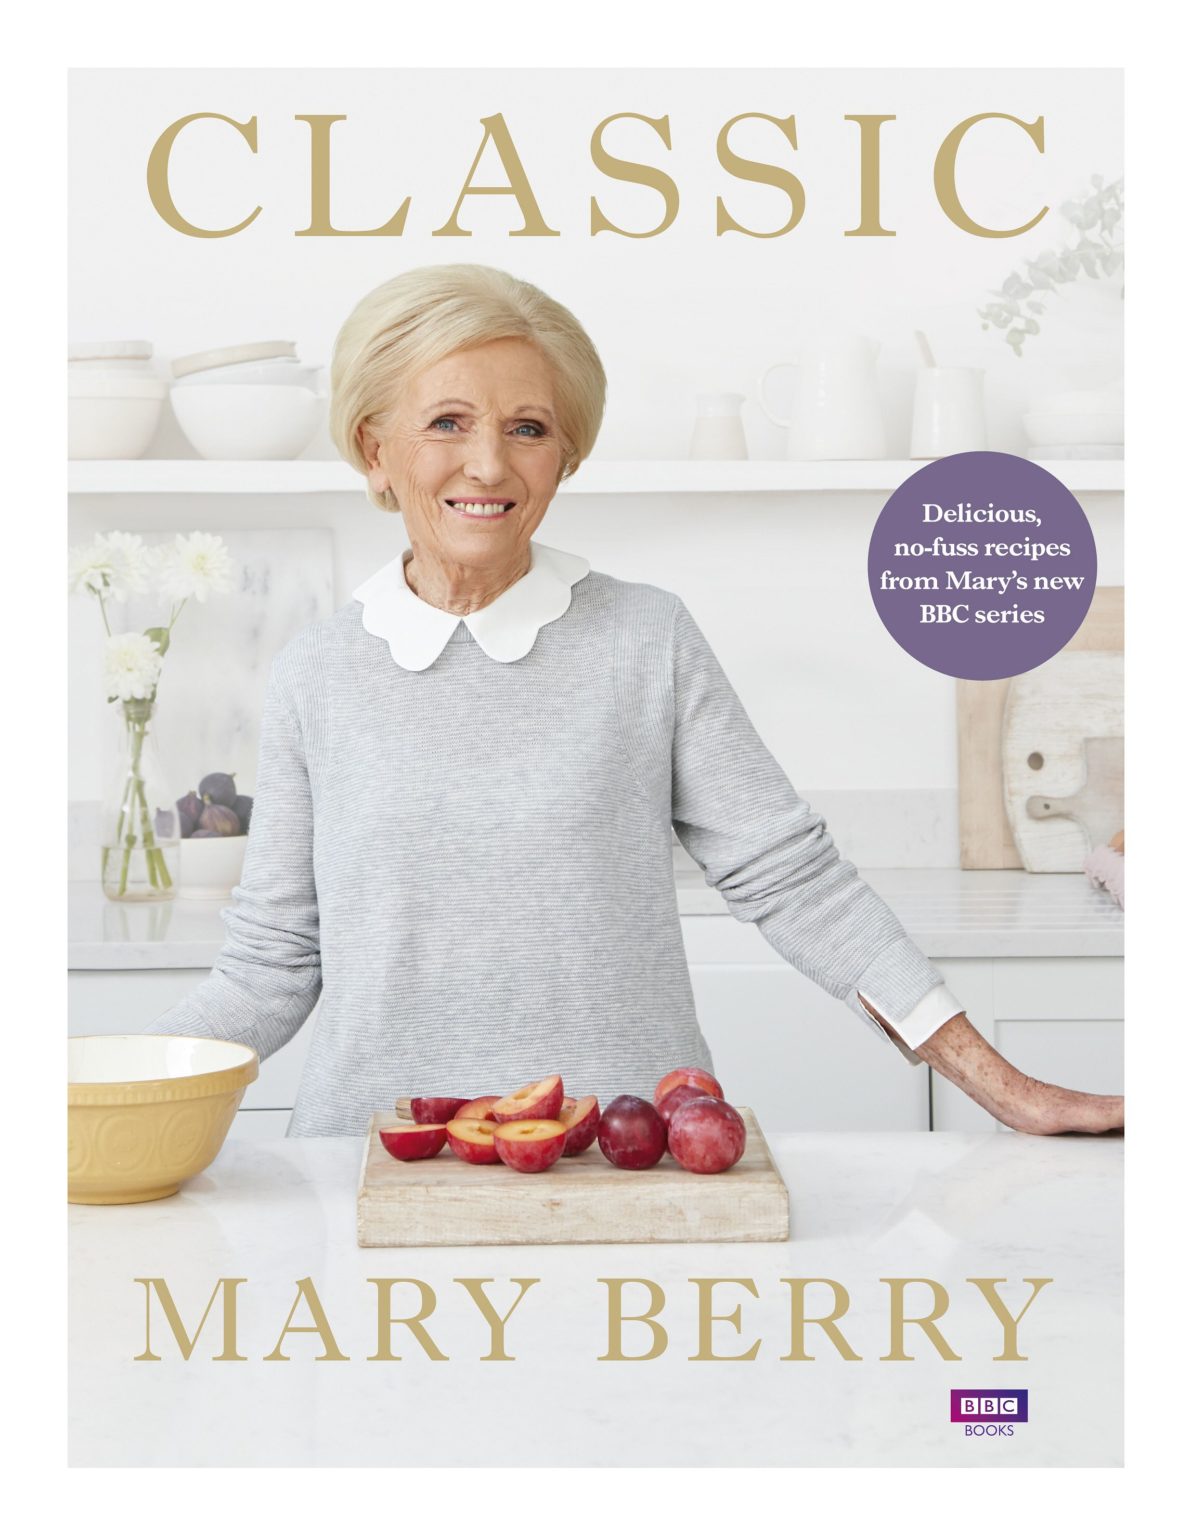 Christmas Dinner Fish Main Course Recipes by Rick Stein & Mary Berry